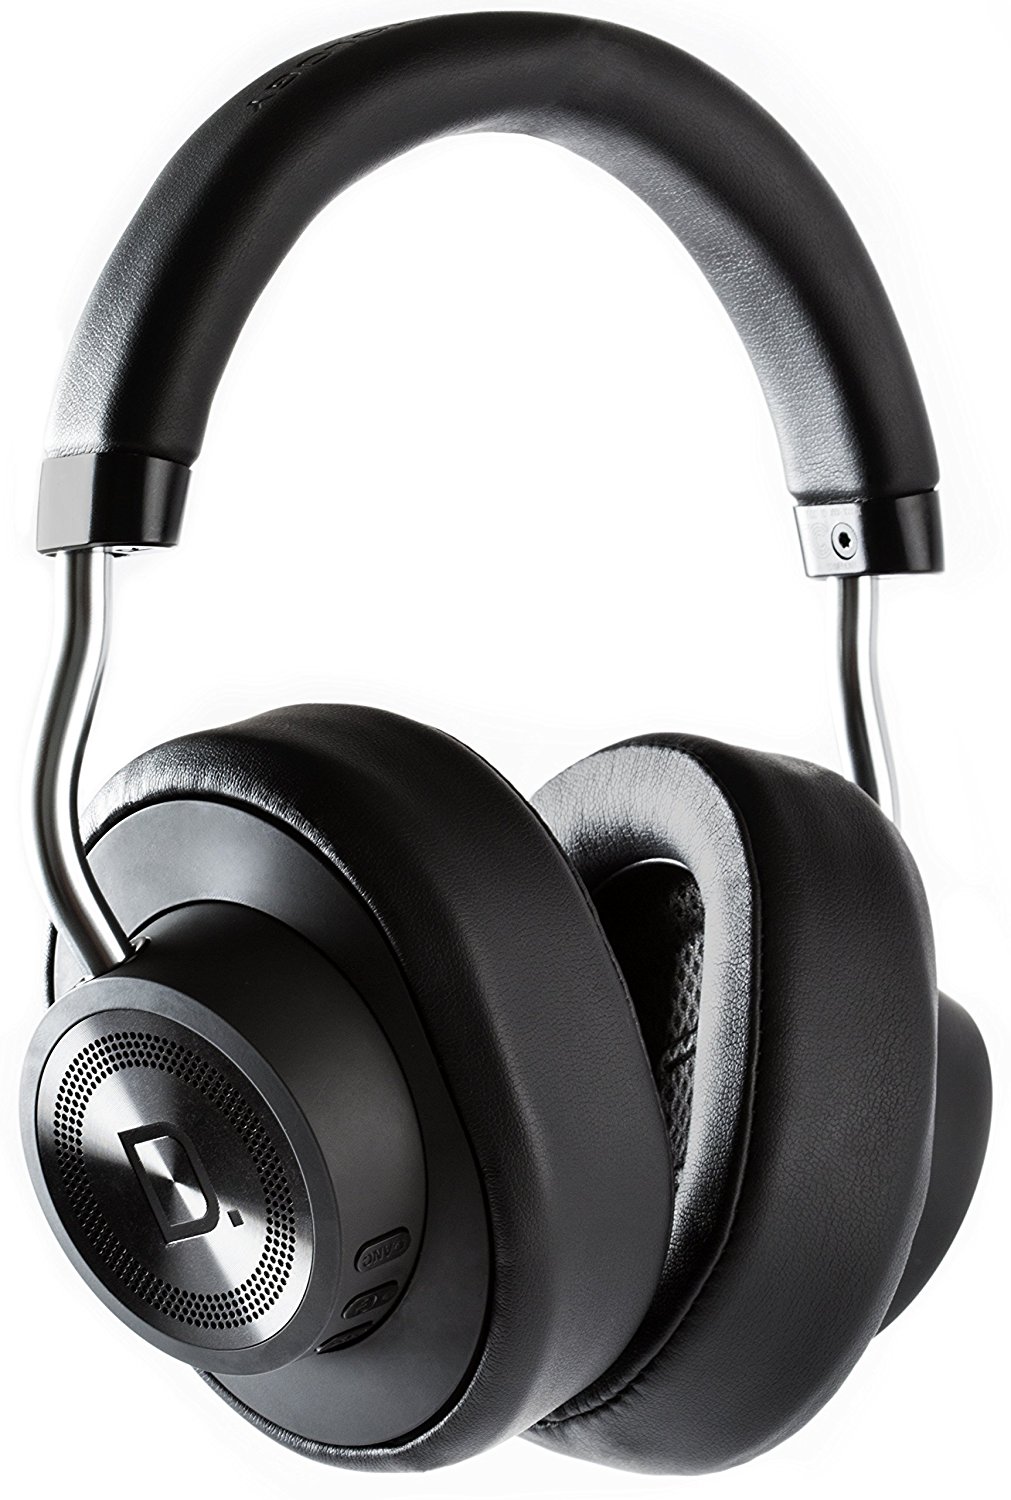 Today only: Definitive Technology Symphony 1 Bluetooth wireless headphones for $120